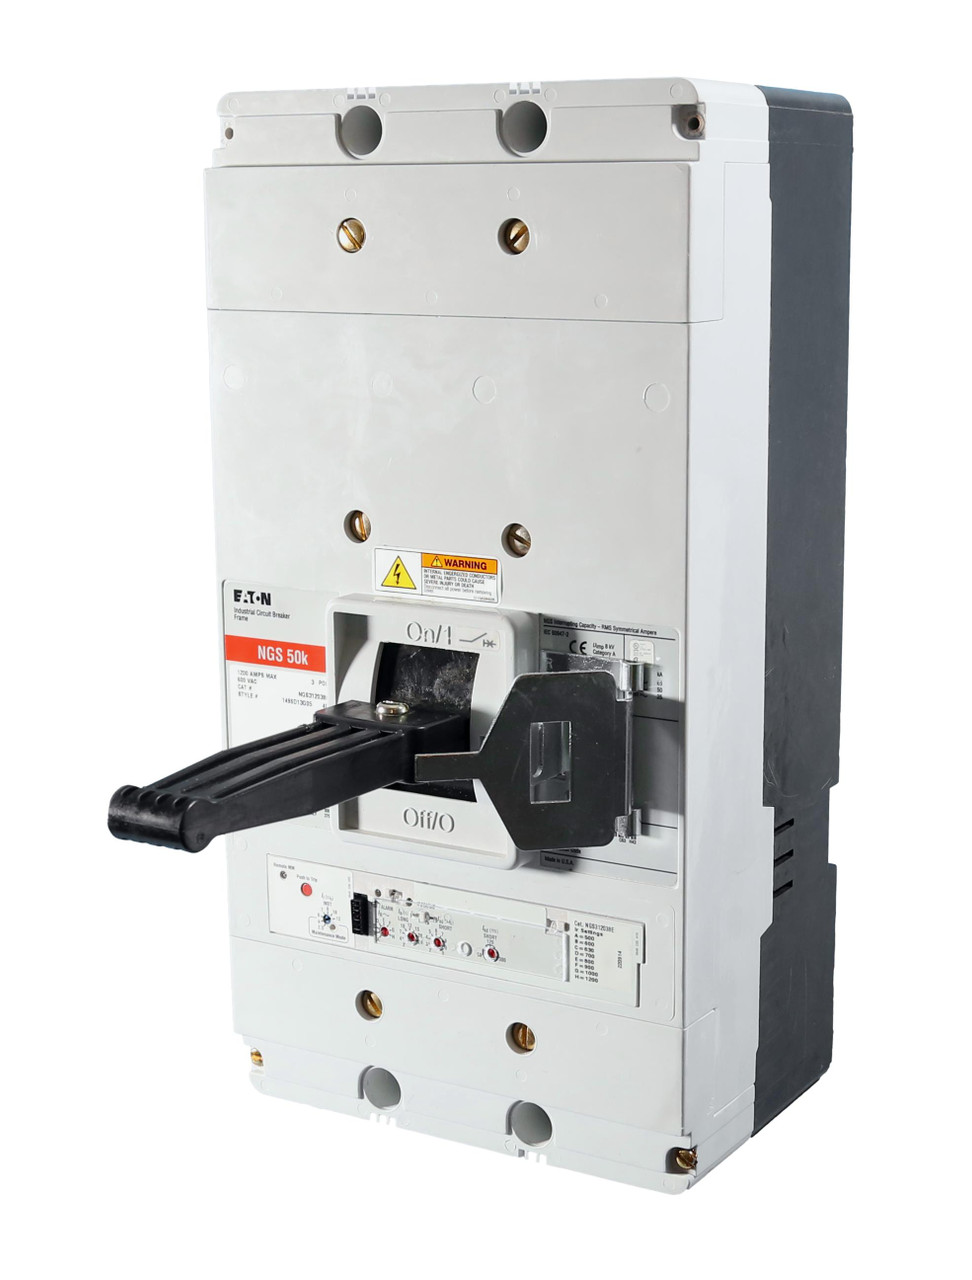 NGS312038E
Eaton 1200A Circuit Breaker with 310+ALSI Trip & Maintenance Mode